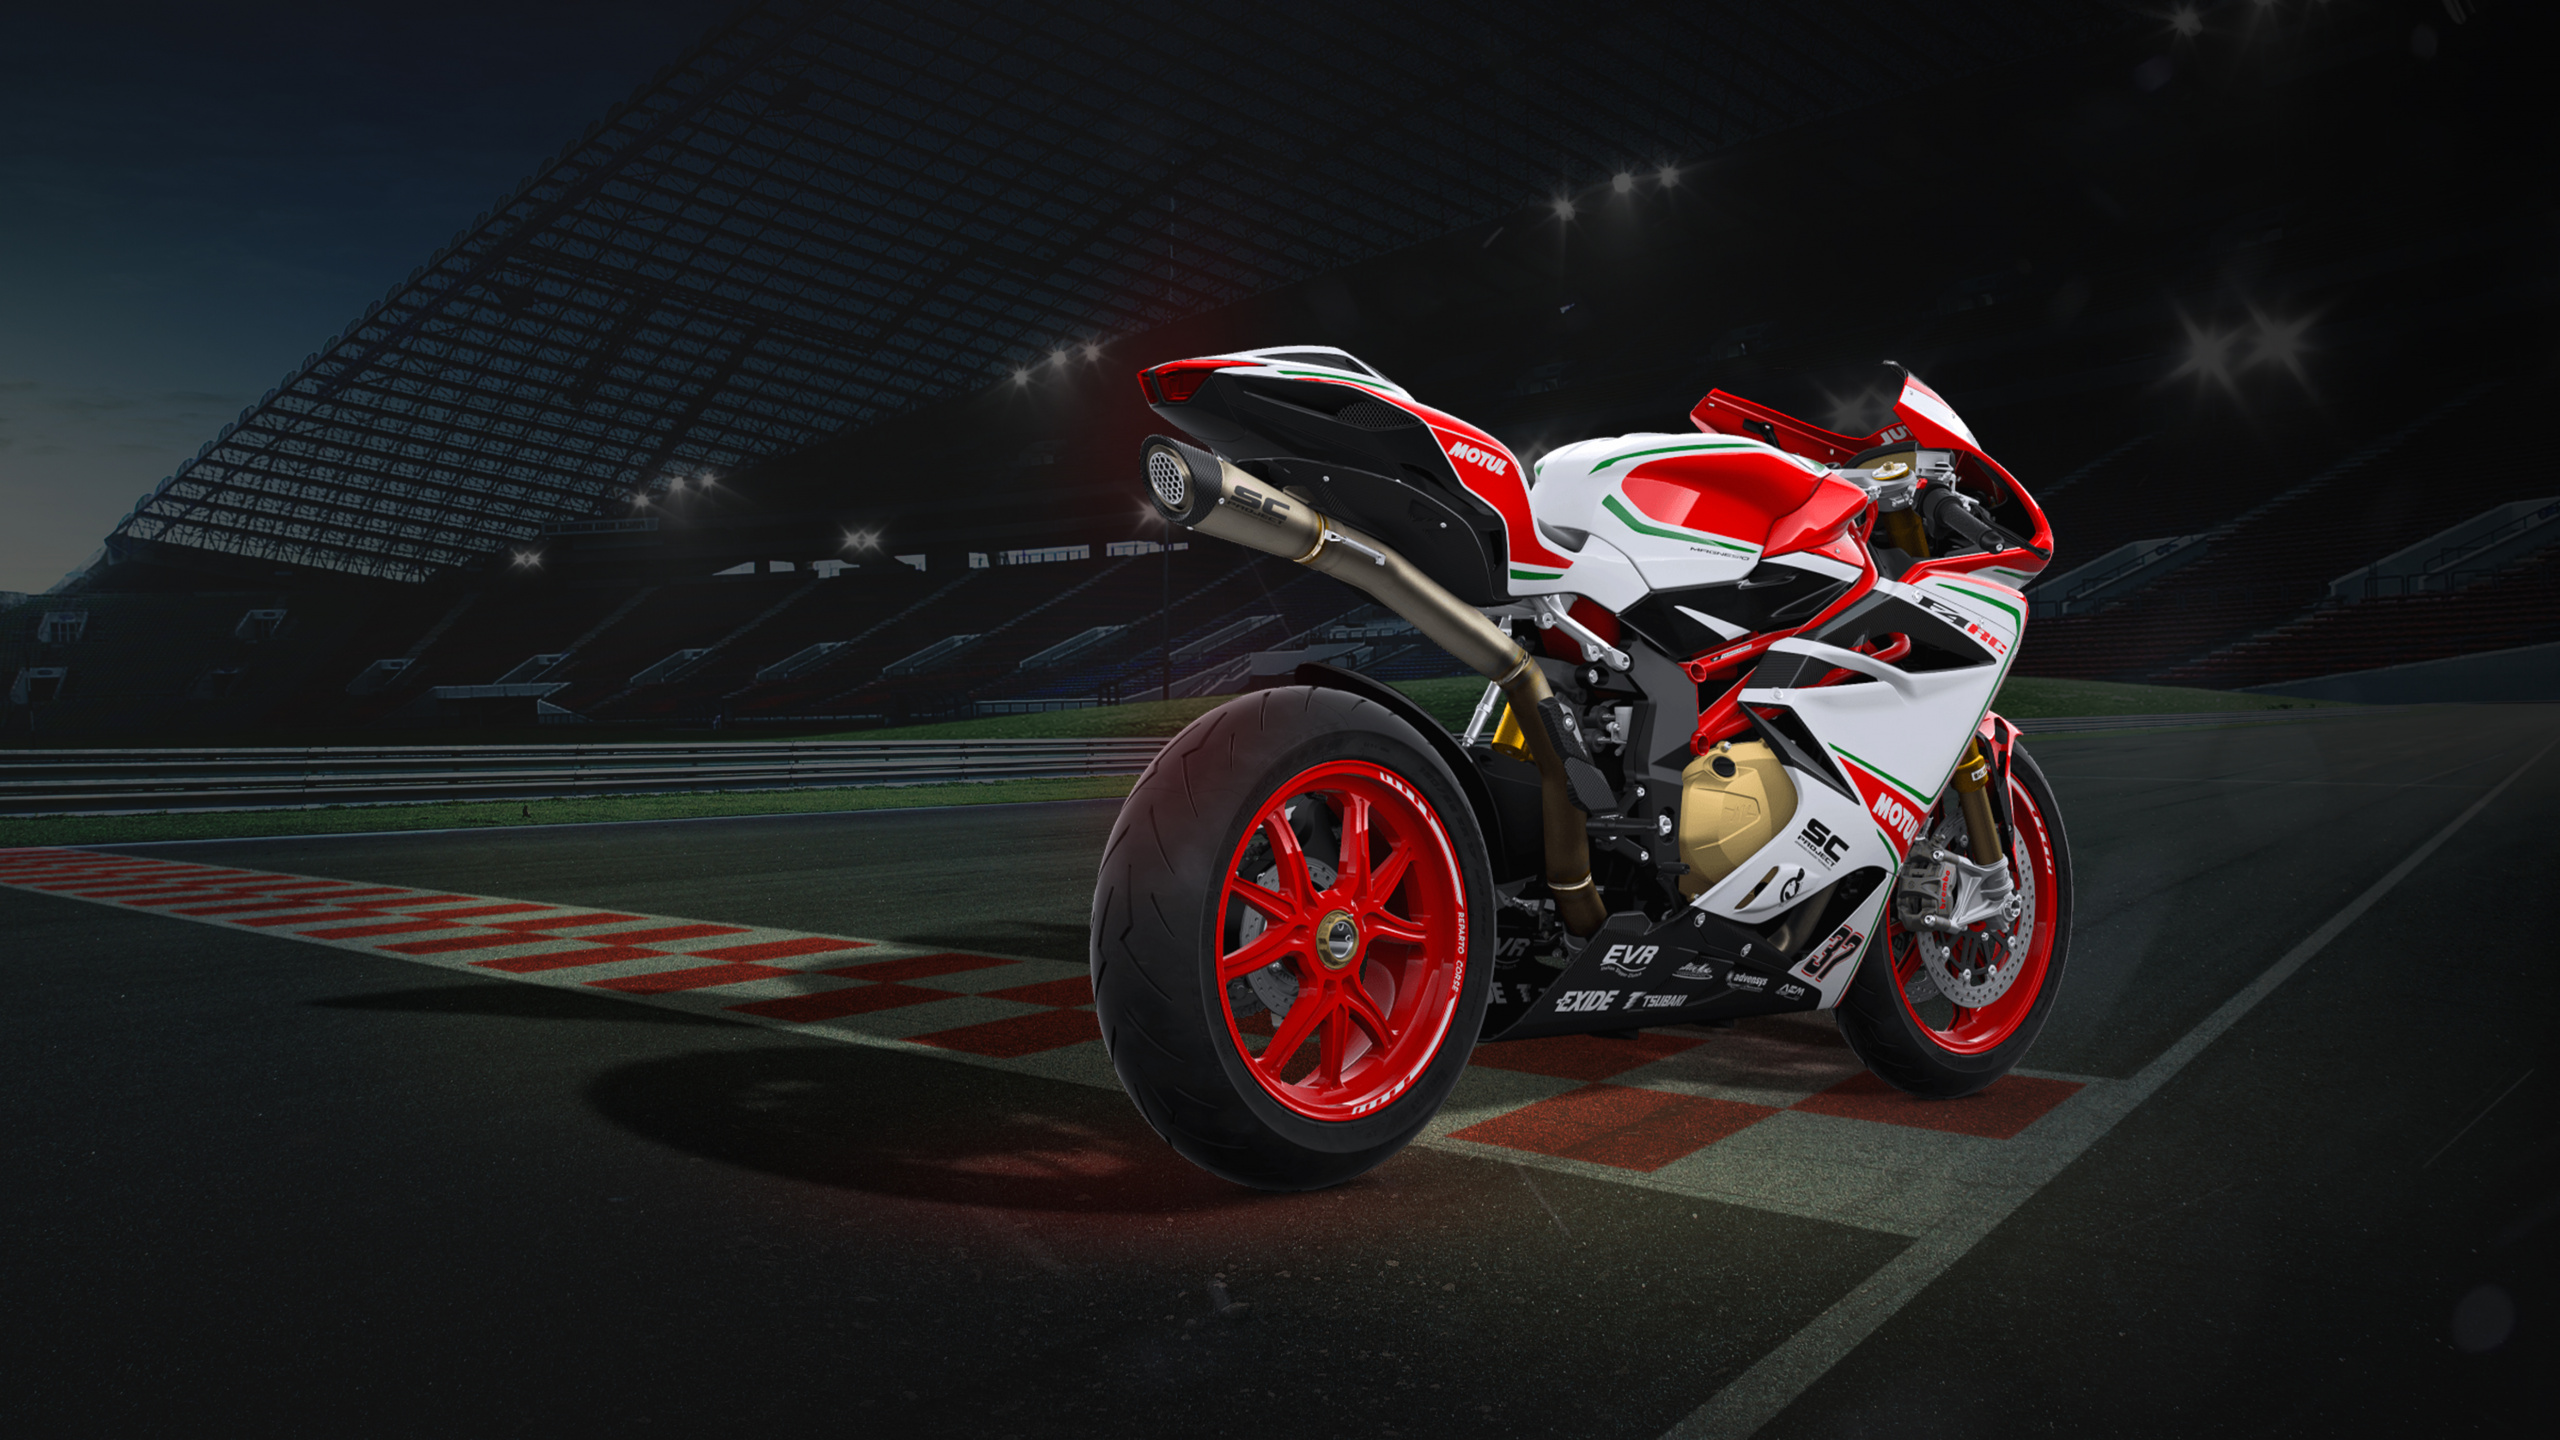 Red and White Sports Bike on Track Field. Wallpaper in 2560x1440 Resolution